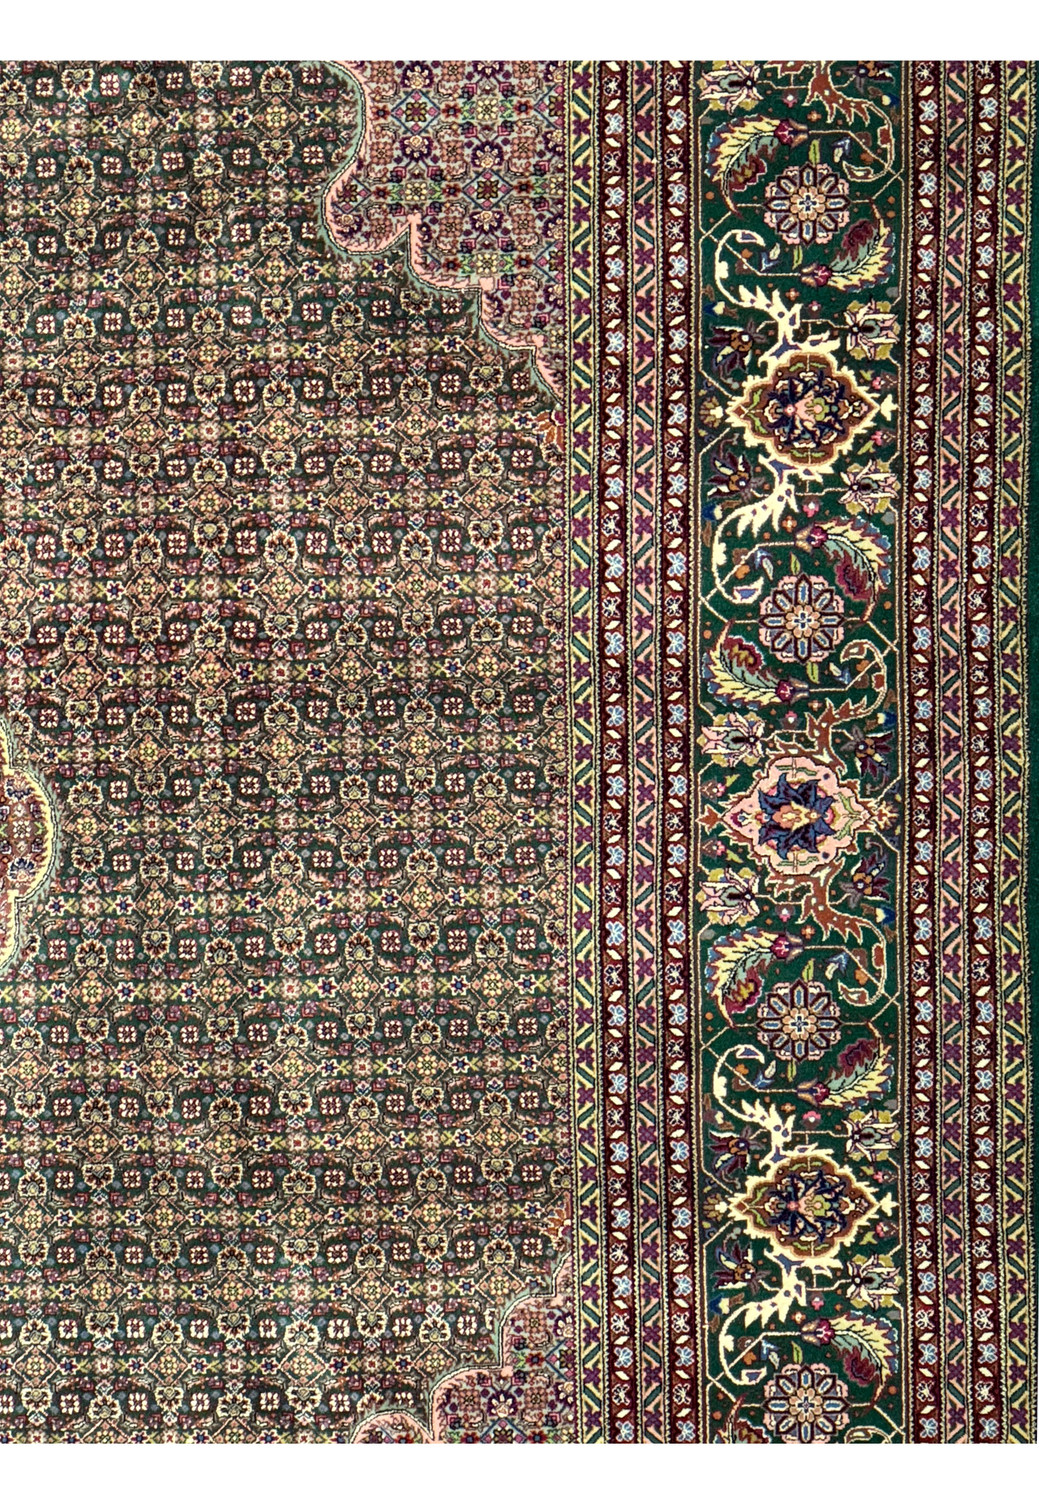 Detailed floral patterns and fish motifs on a Persian Tabriz 50 Raj rug.